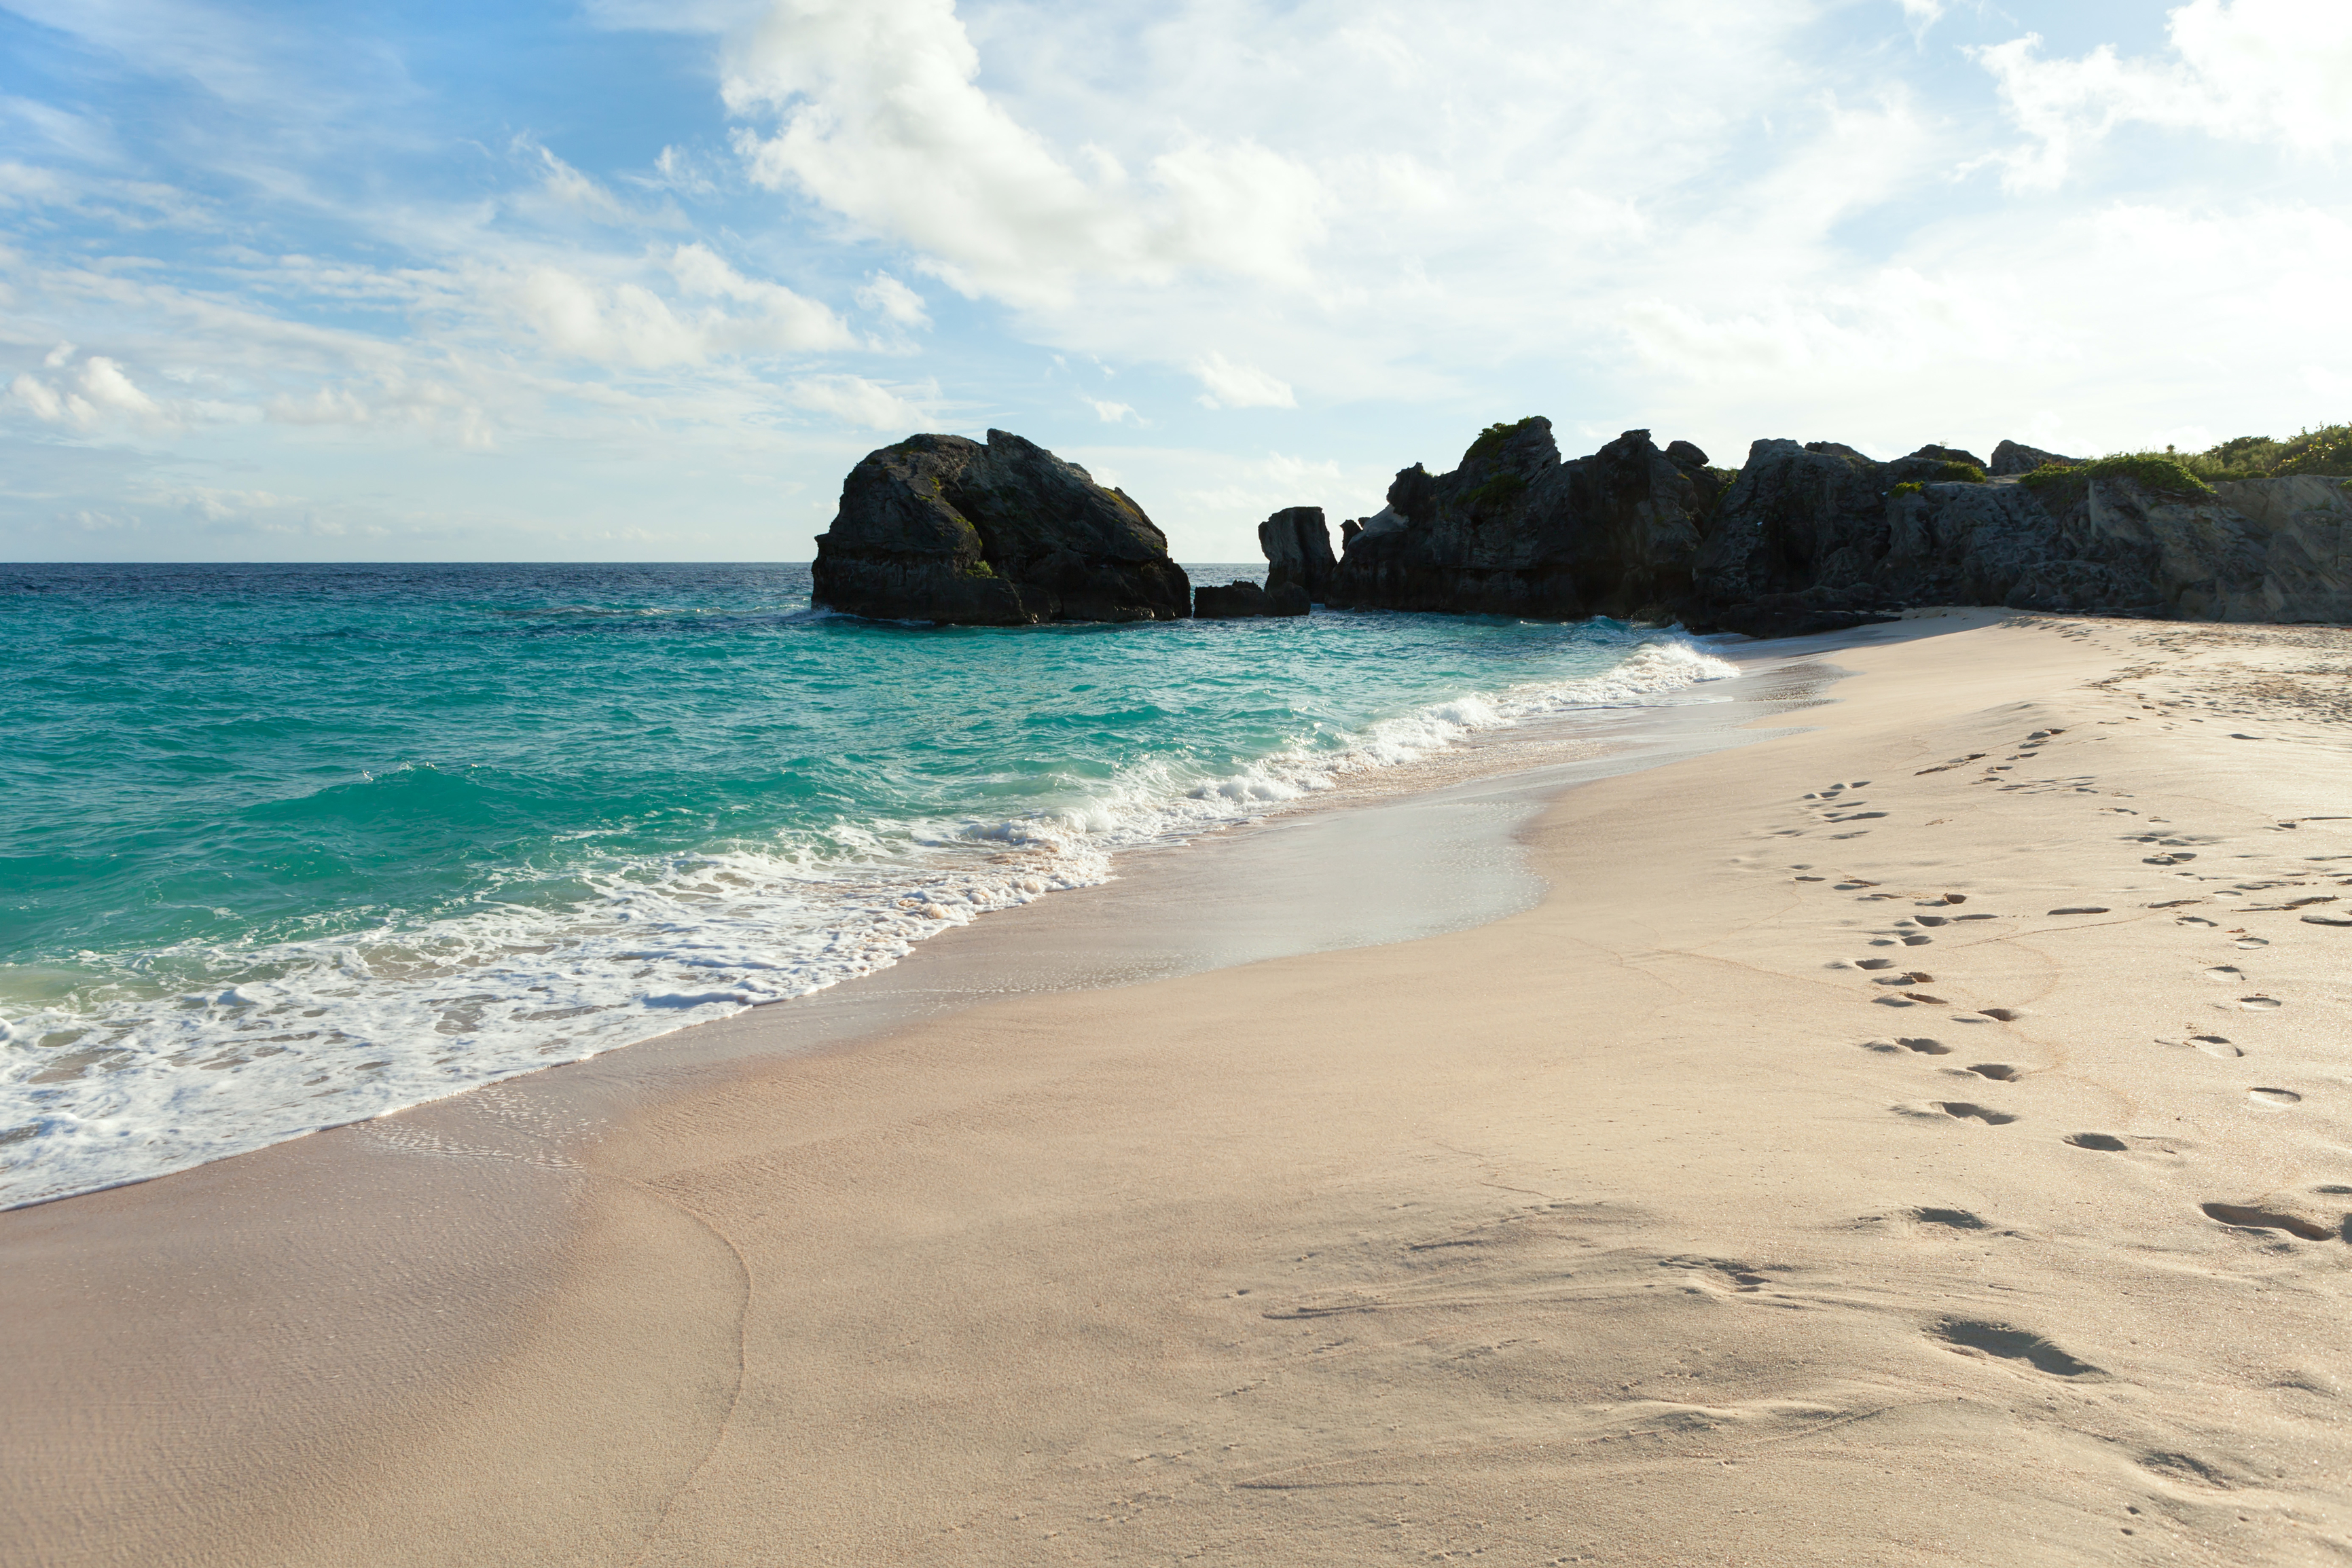 Flights to Bermuda in the $200s to $300s round-trip